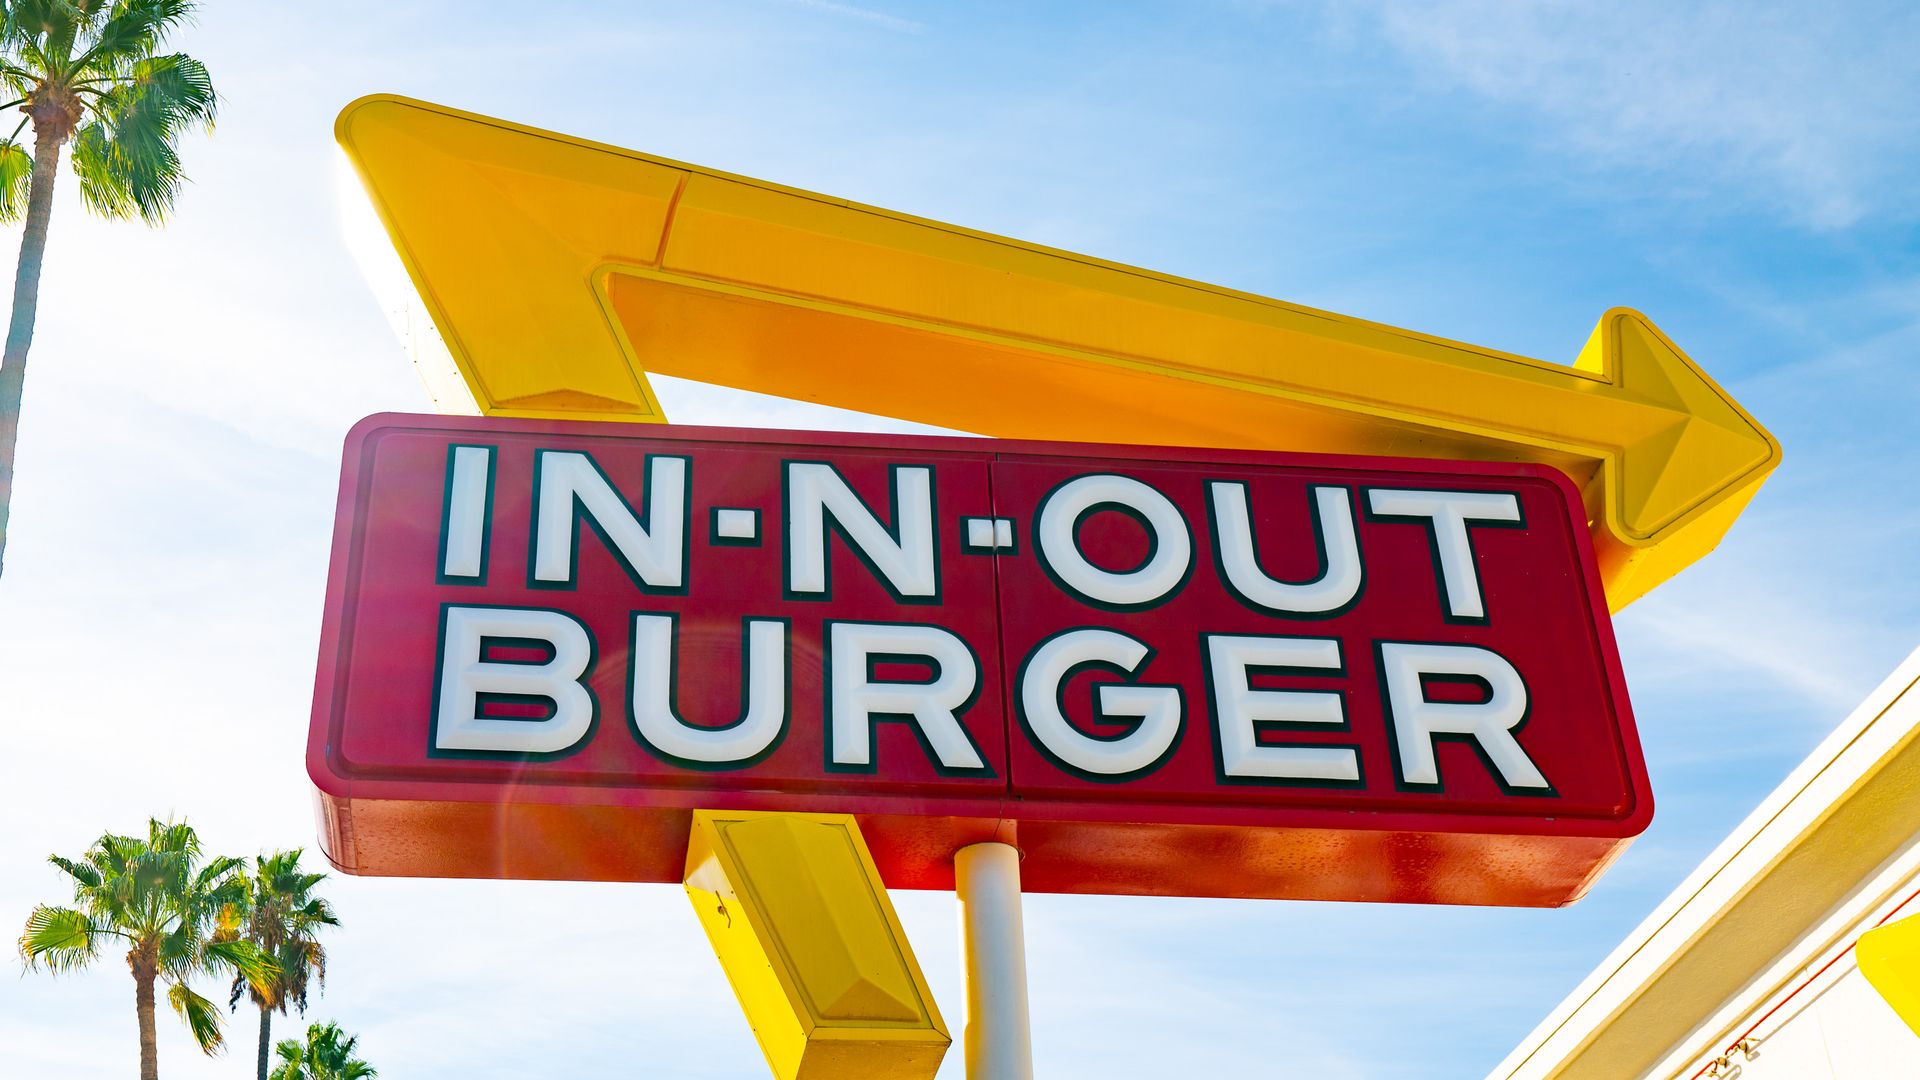 An in-n-out burger sign 